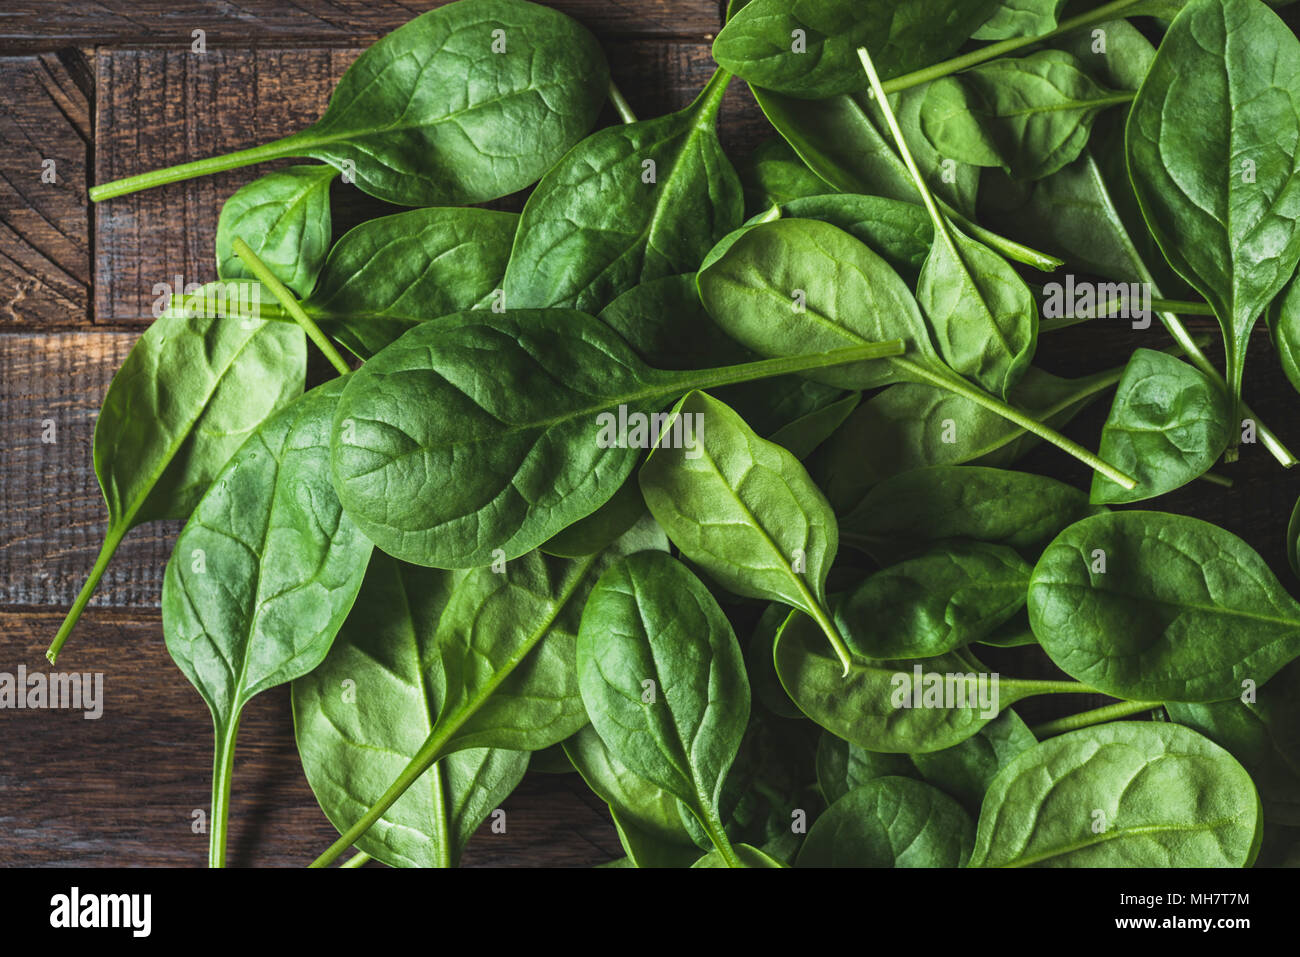 Baby spinach leaf on wood as a background. Horizontal composition. Detox, healthy lifestyle, healthy eating, vegan diet concept Stock Photo